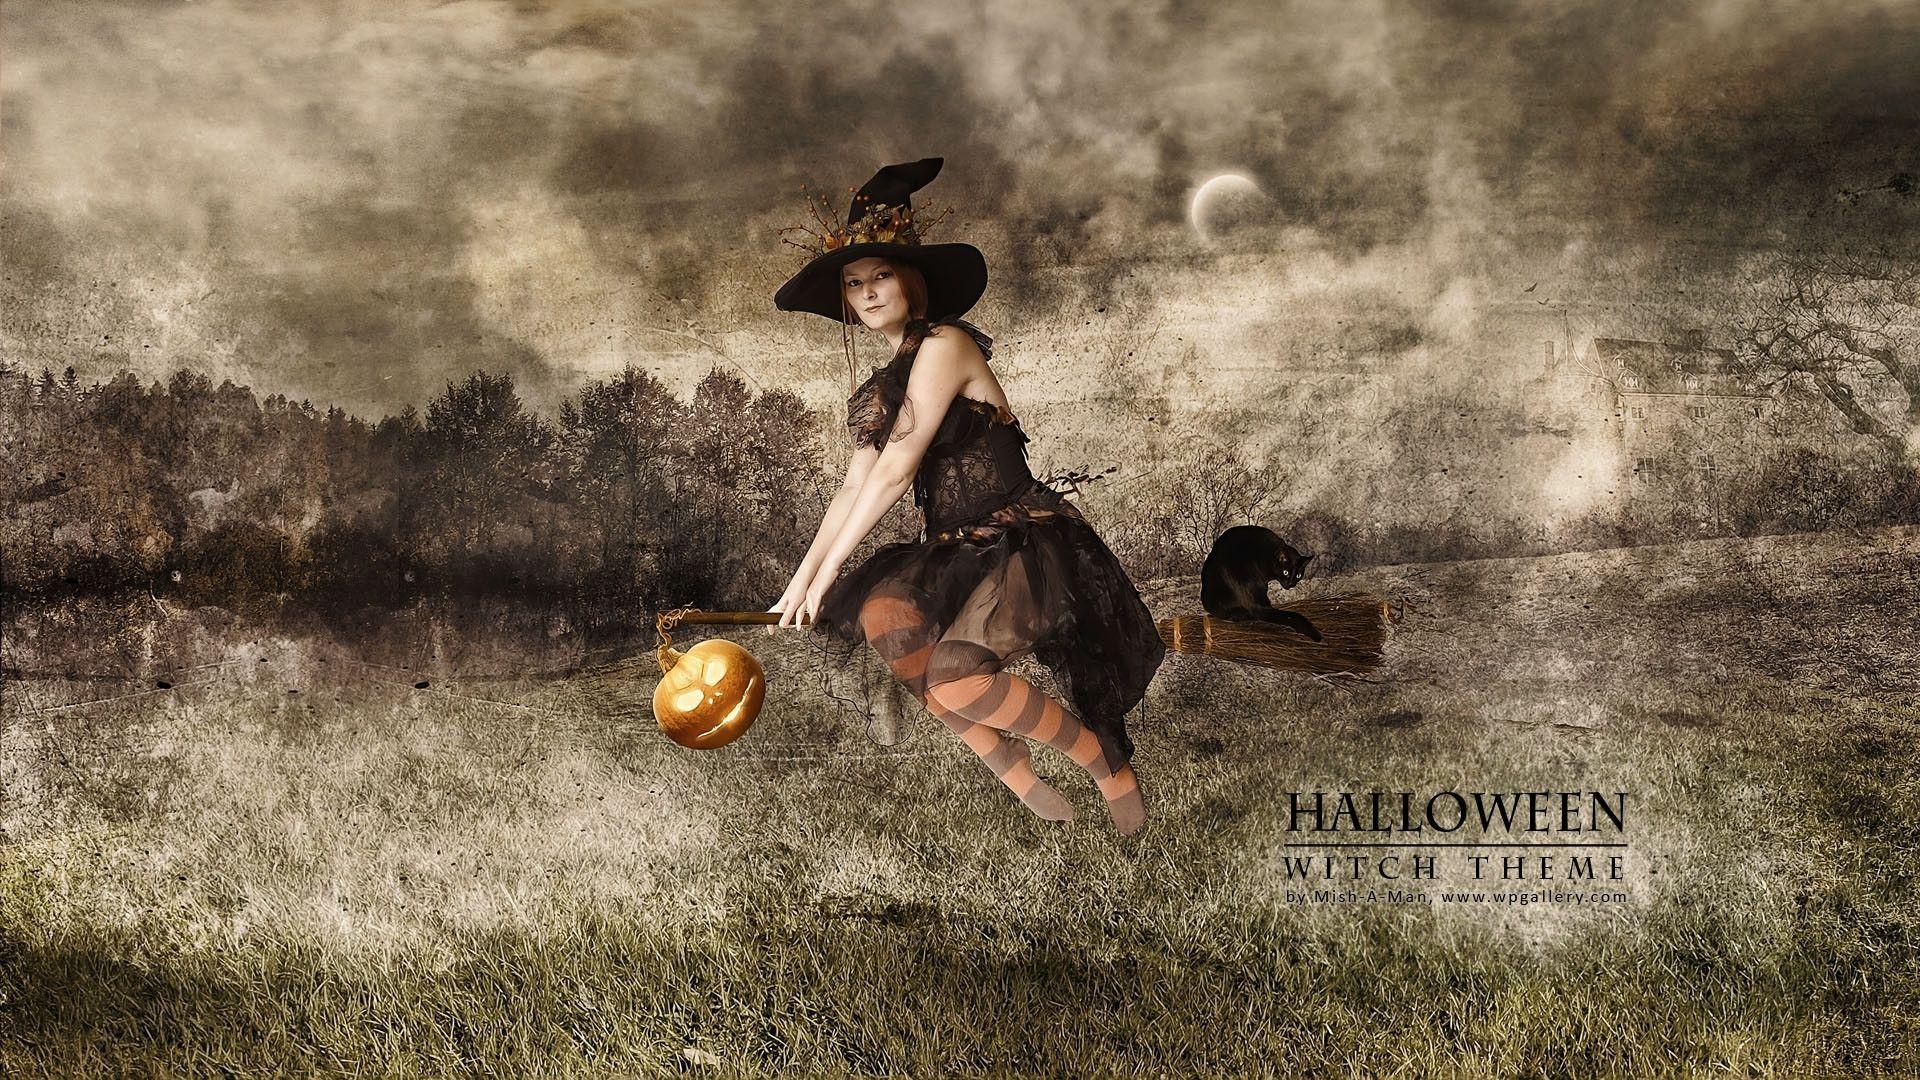 Halloween Witch Wallpaper and Picture. Download Themes